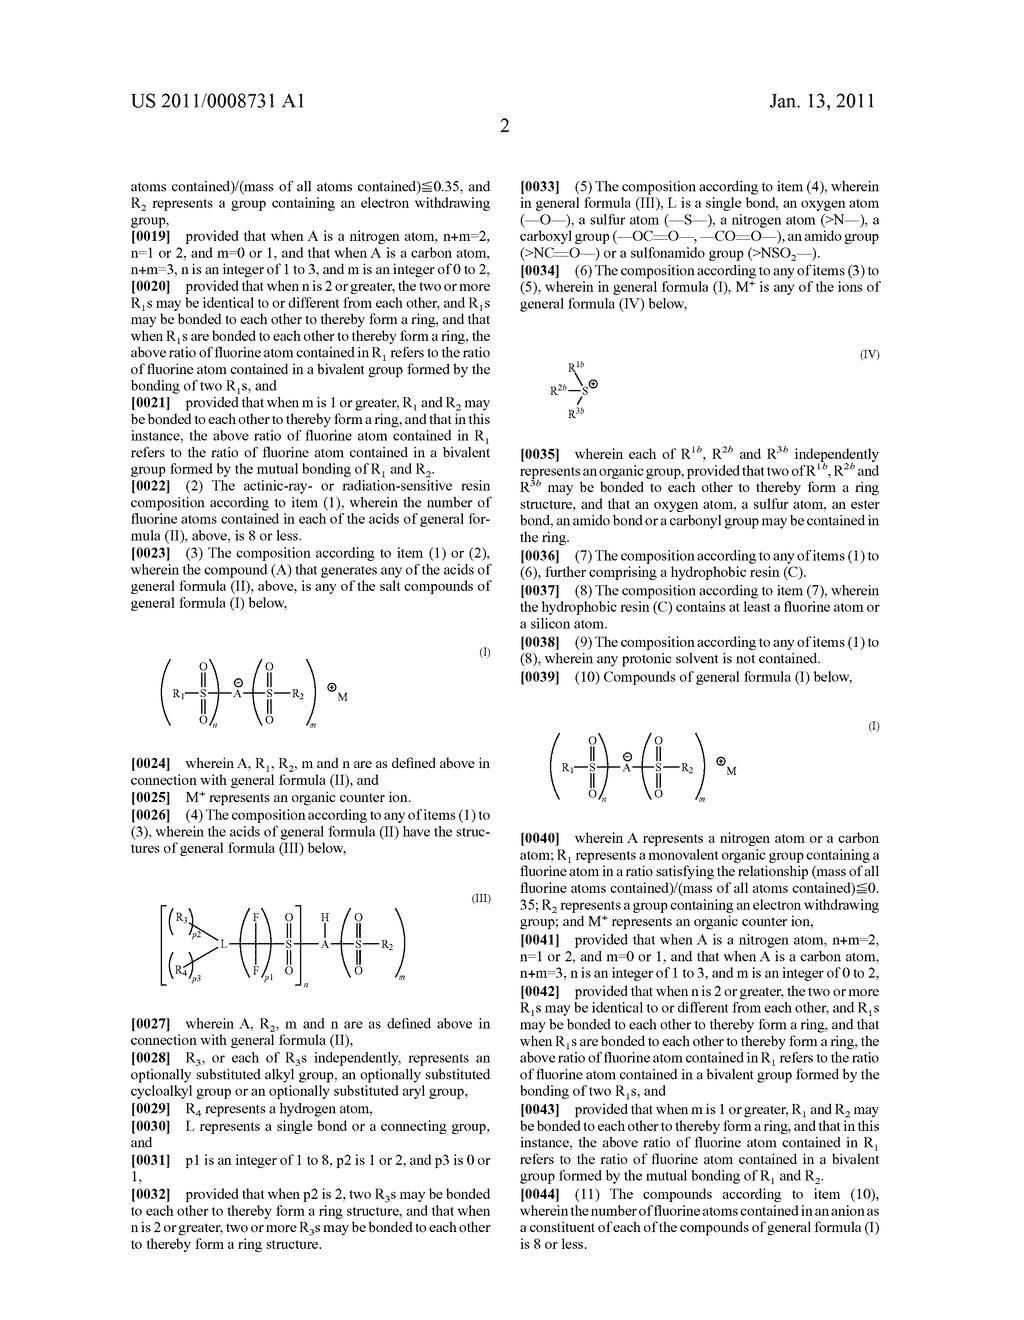 ACTINIC-RAY-OR RADIATION-SENSITIVE RESIN COMPOSITION, COMPOUND AND METHOD OF FORMING PATTERN USING THE COMPOSITION - diagram, schematic, and image 03